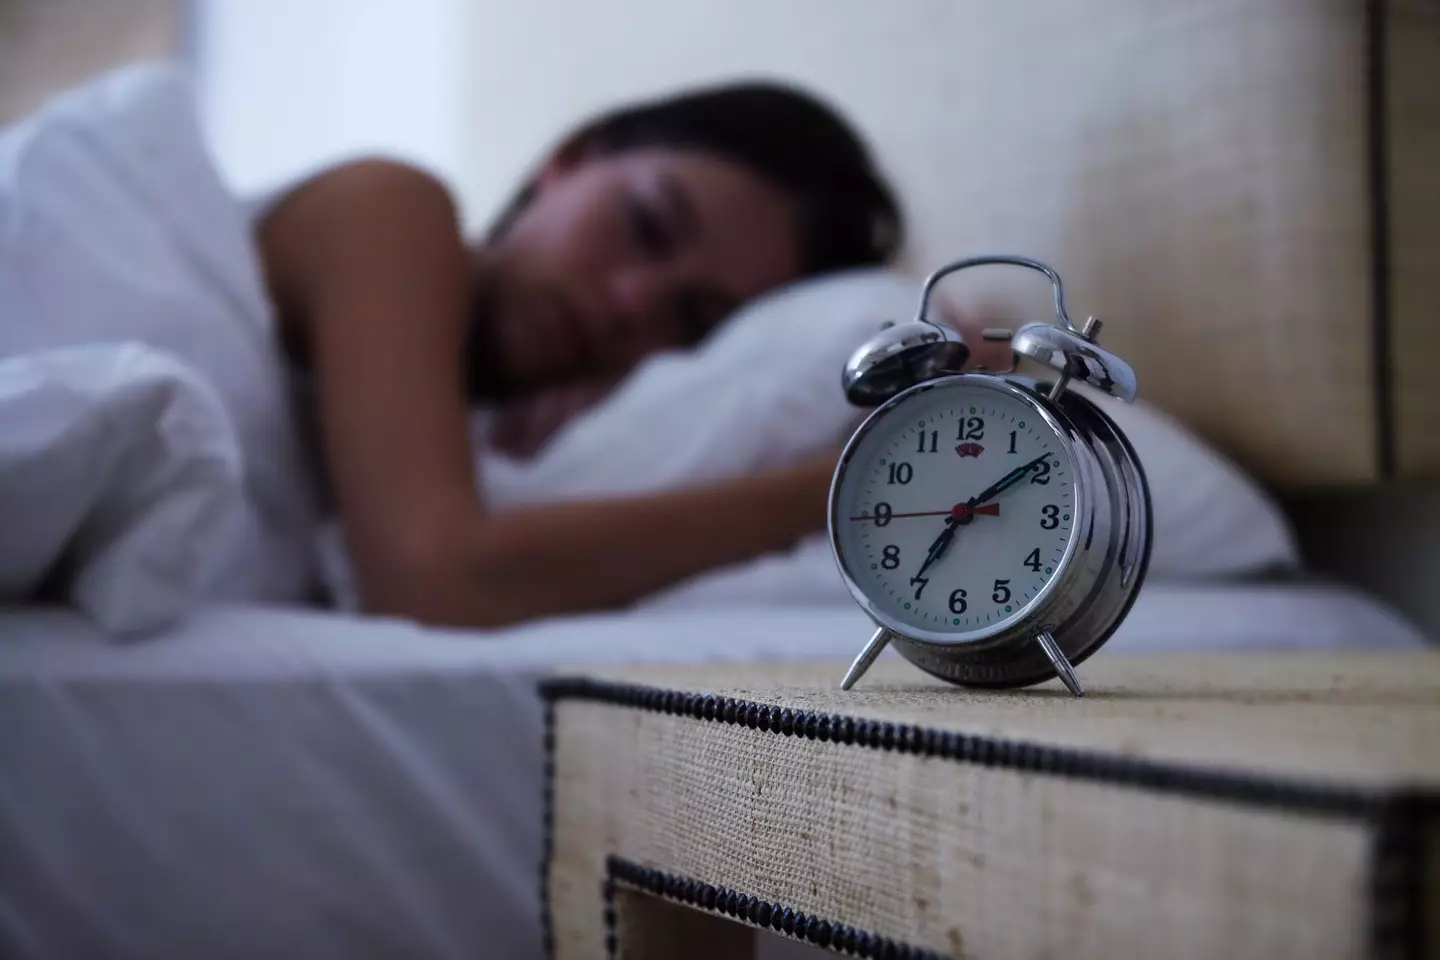 One sleep expert has revealed how to best recover from the clocks going forward this weekend (31 March).